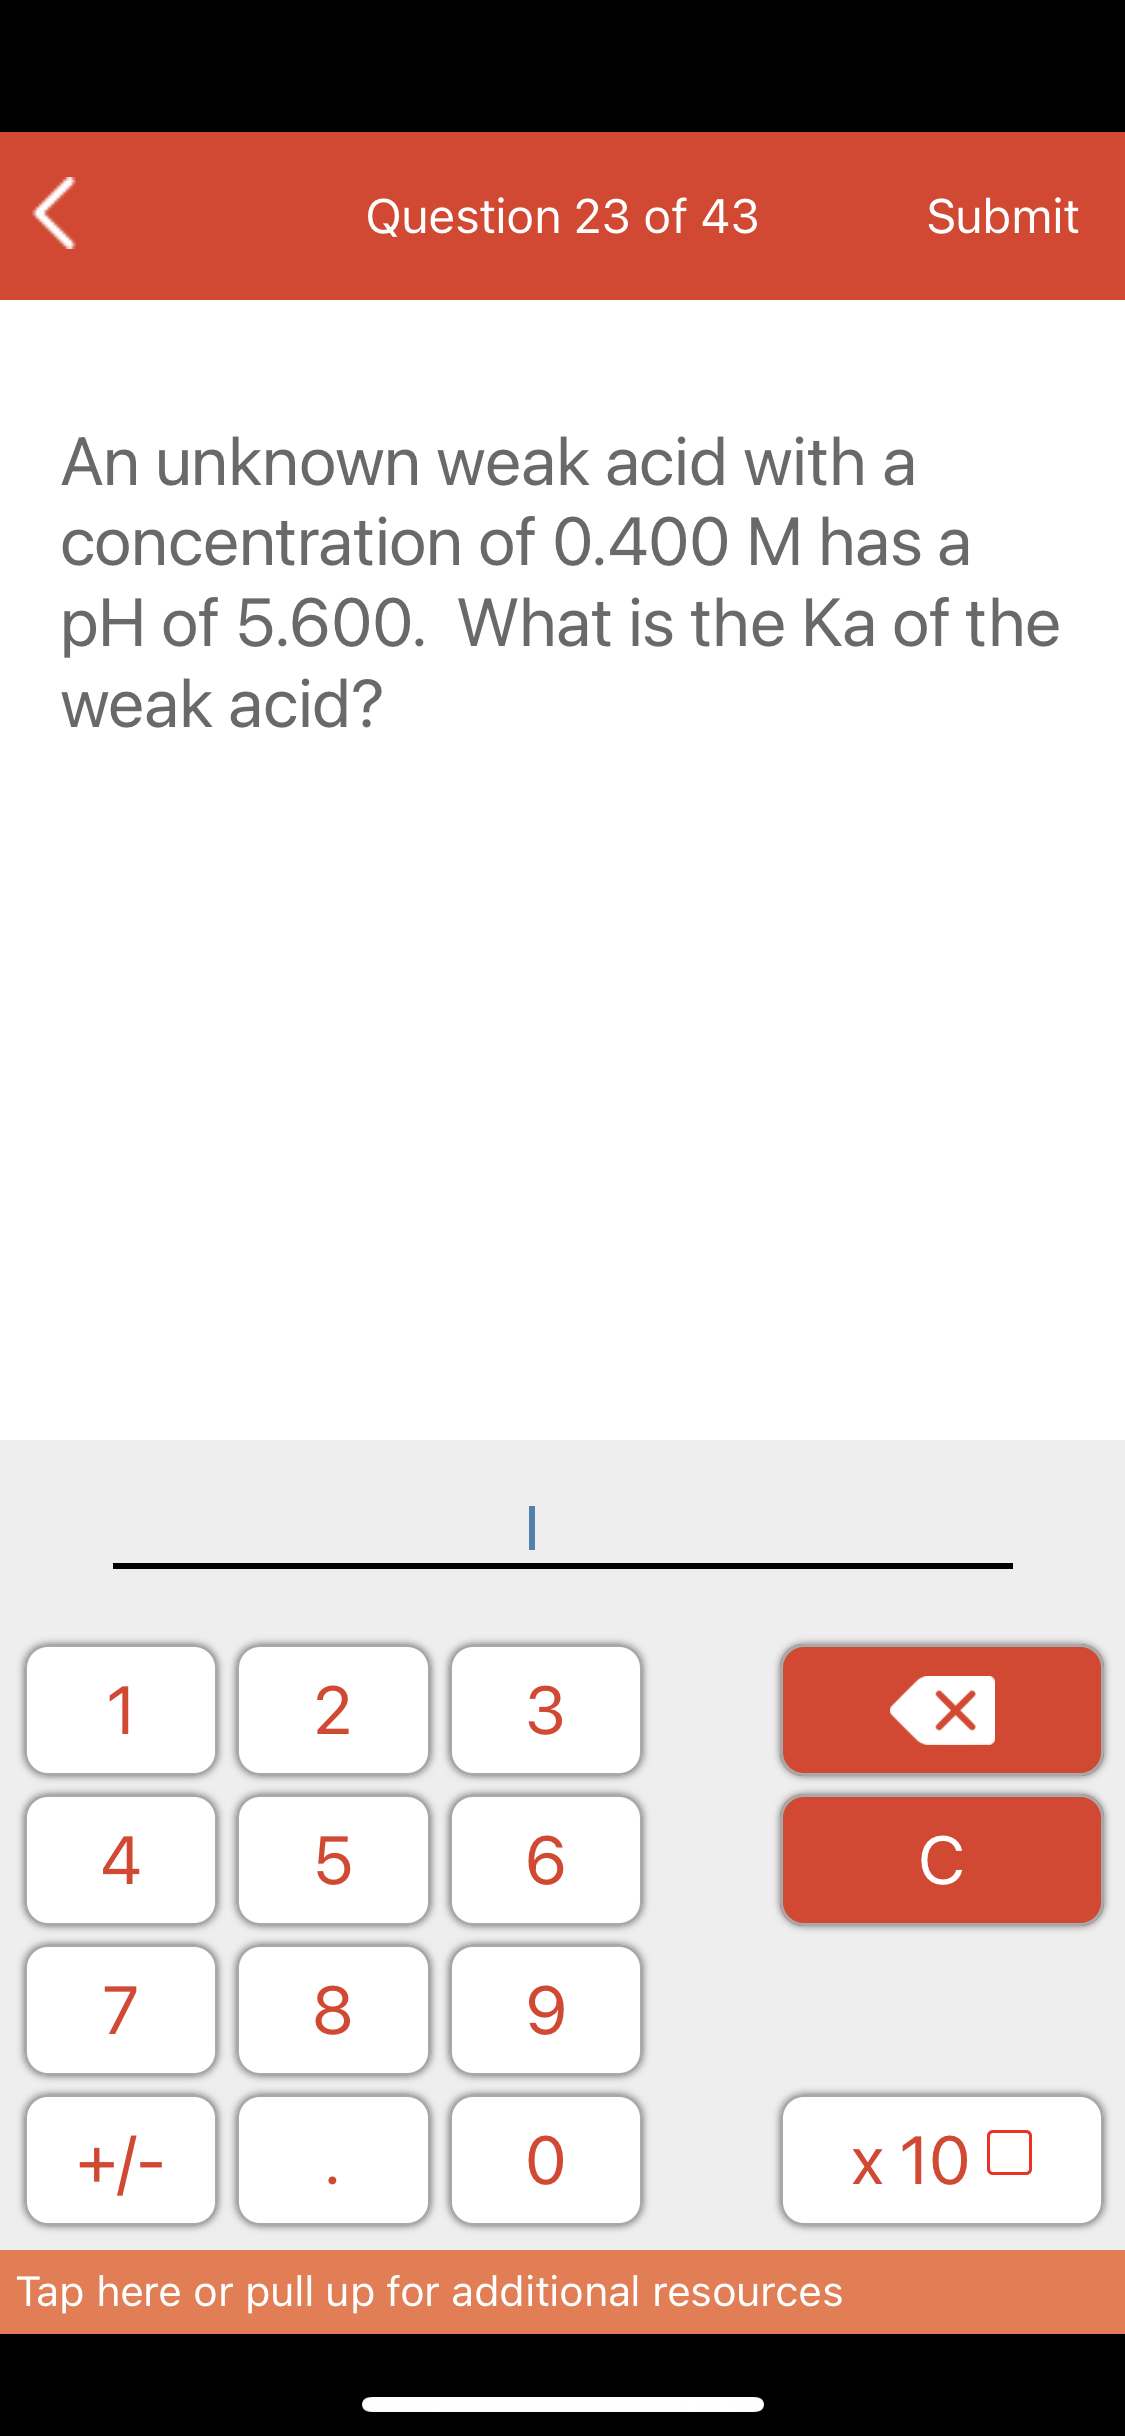 Question 23 of 43
Submit
An unknown weak acid with a
concentration of 0.400 M has a
pH of 5.600. What is the Ka of the
weak acid?
1
2
3
C
7
8
+/-
x 10 0
Tap here or pull up for additional resources
LO
